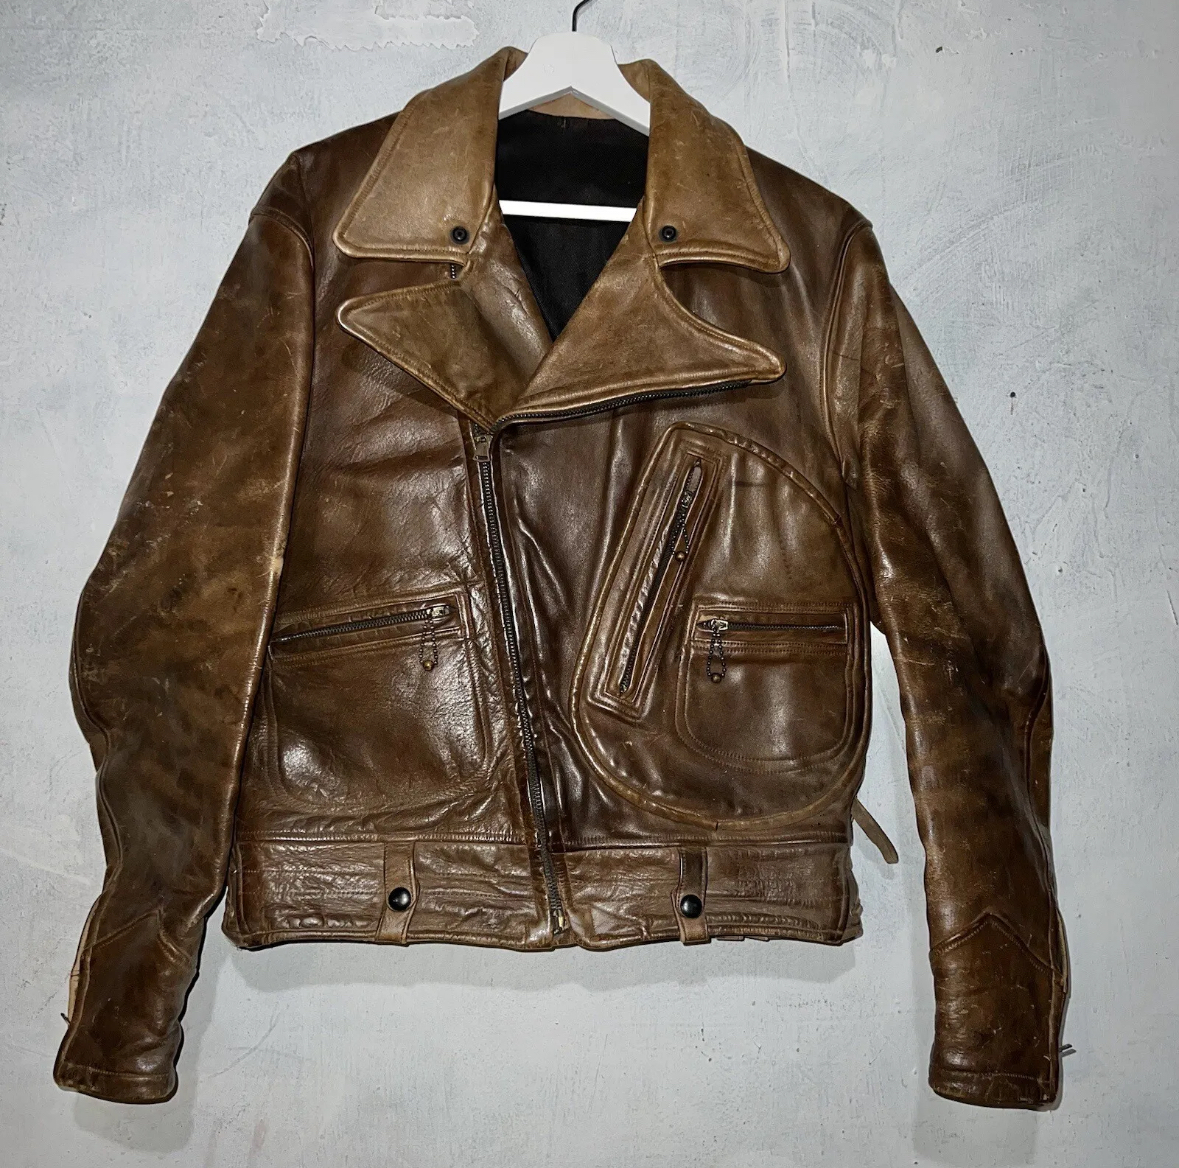 Finds and Deals - Leather Jacket Edition | Page 1126 | The Fedora Lounge